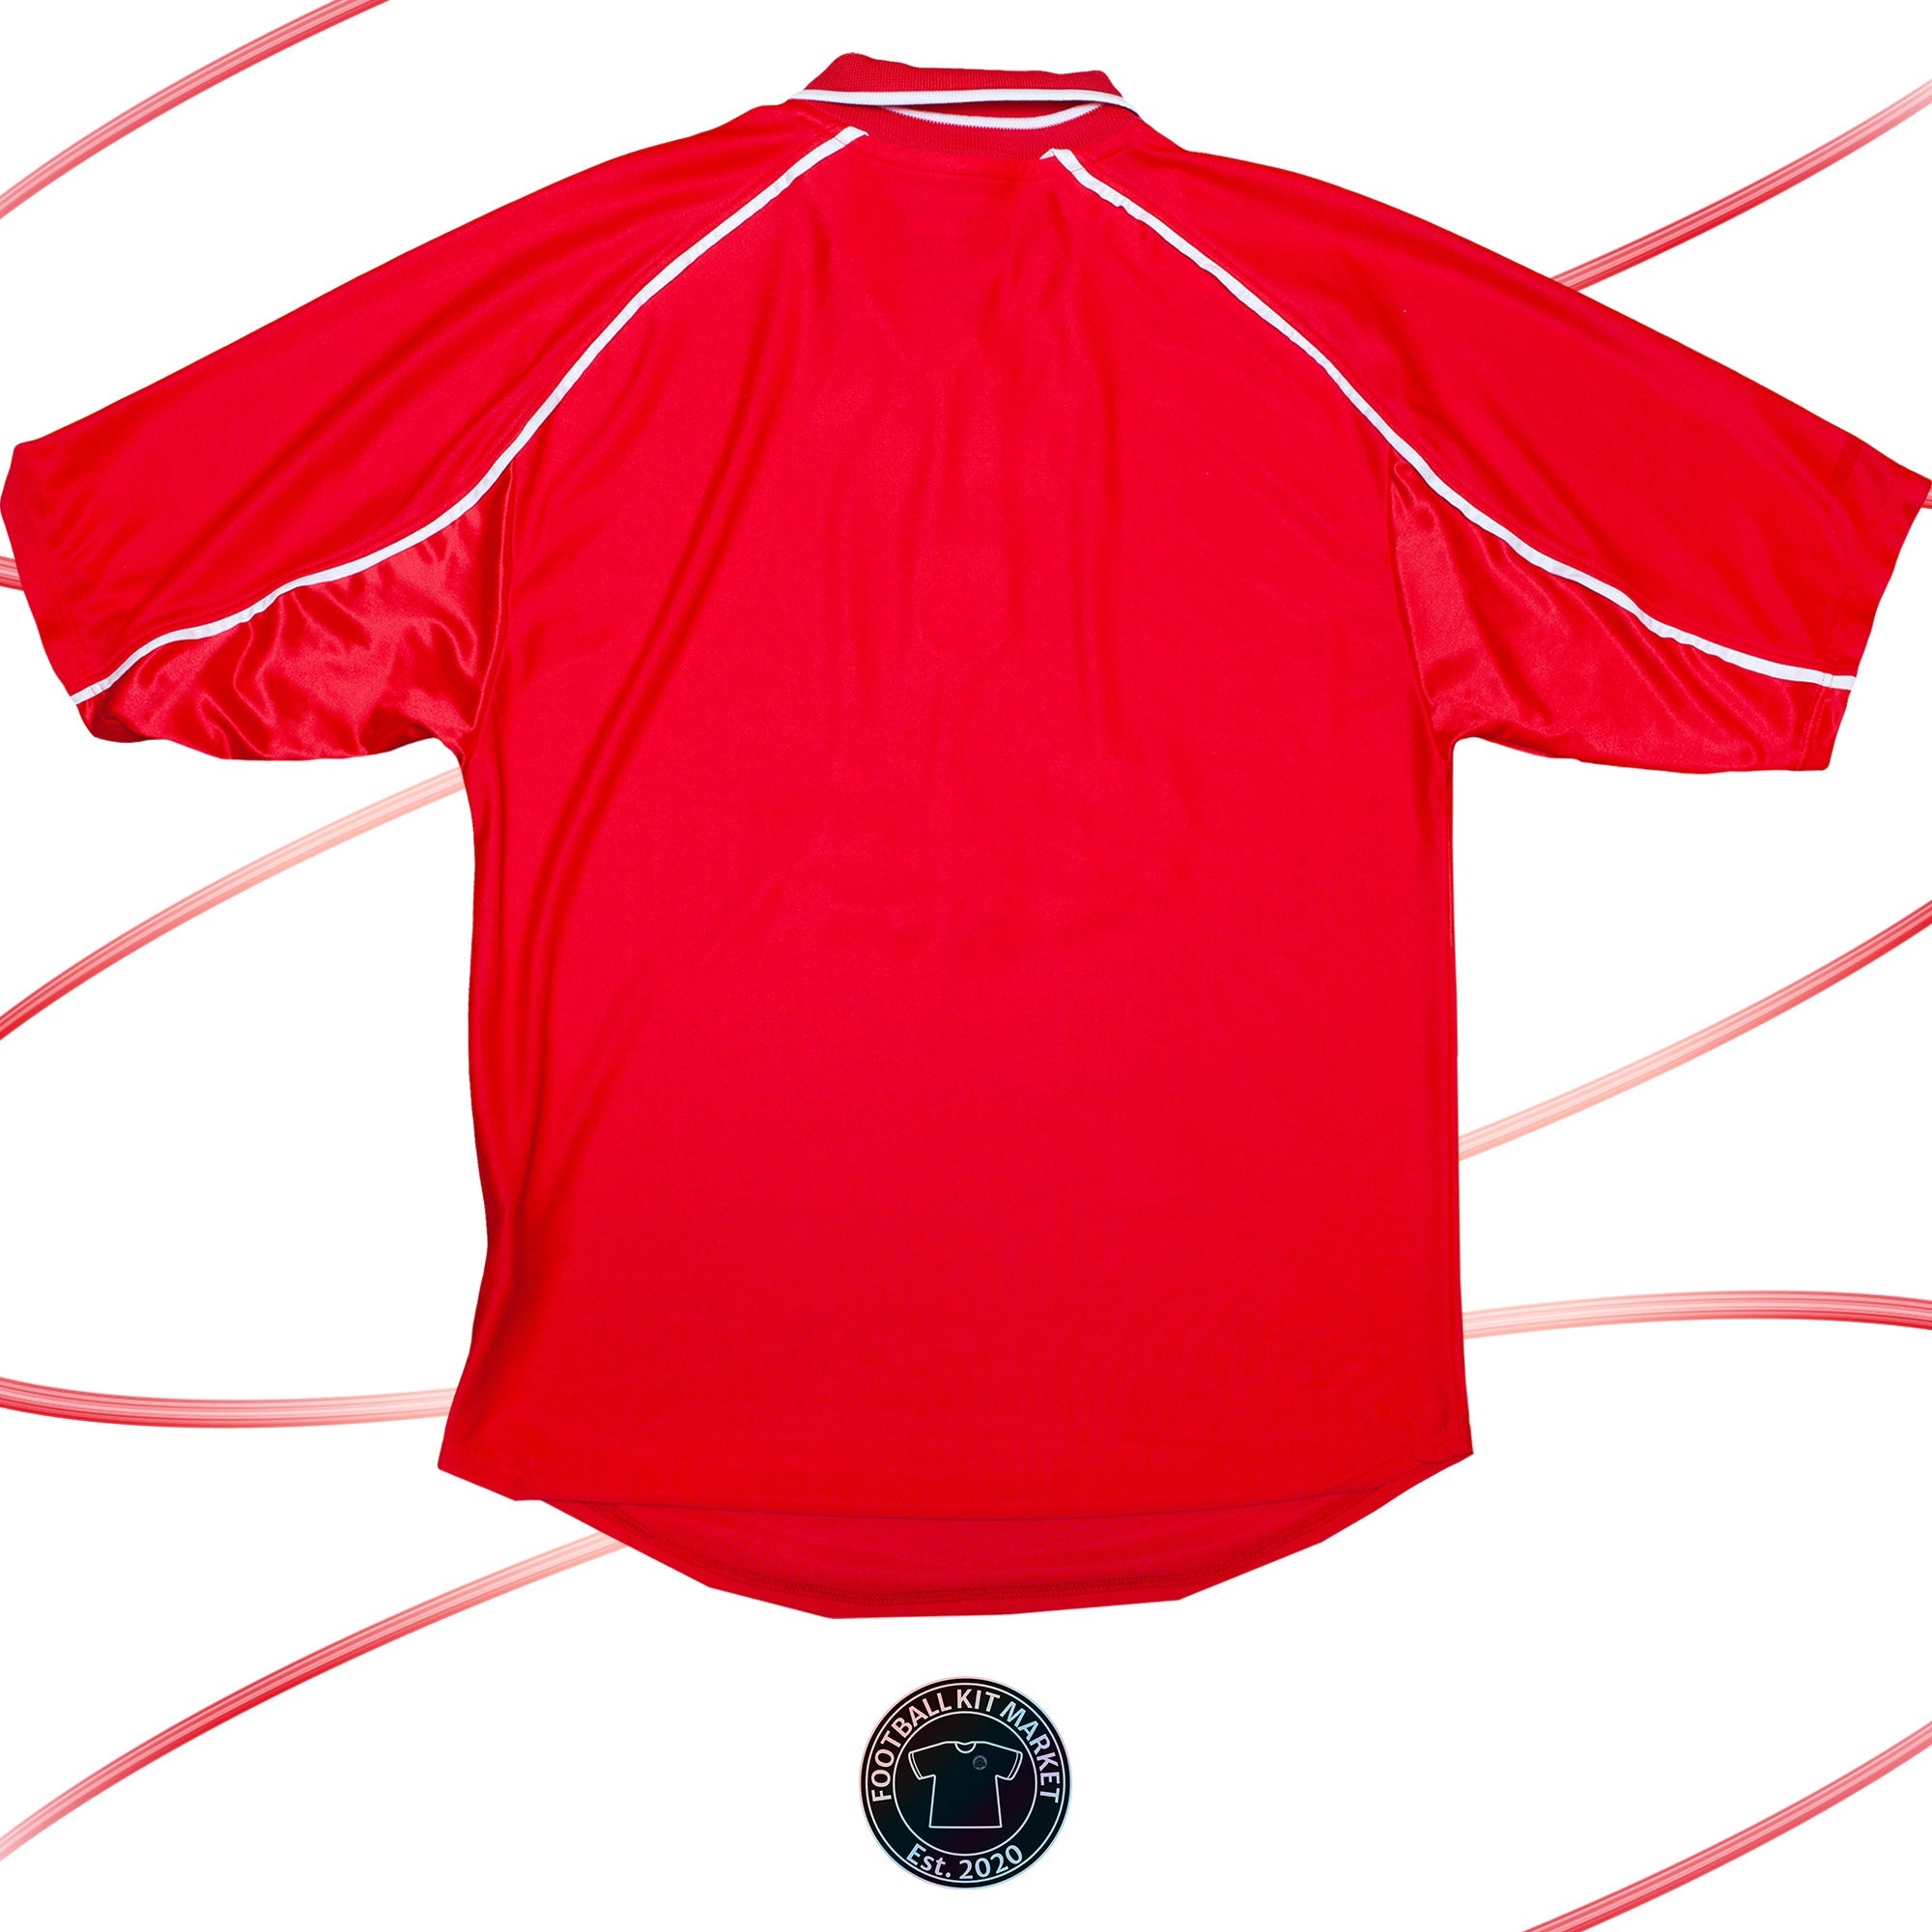 Genuine LIVERPOOL Home Shirt (2000-2002) - REEBOK (M) - Product Image from Football Kit Market